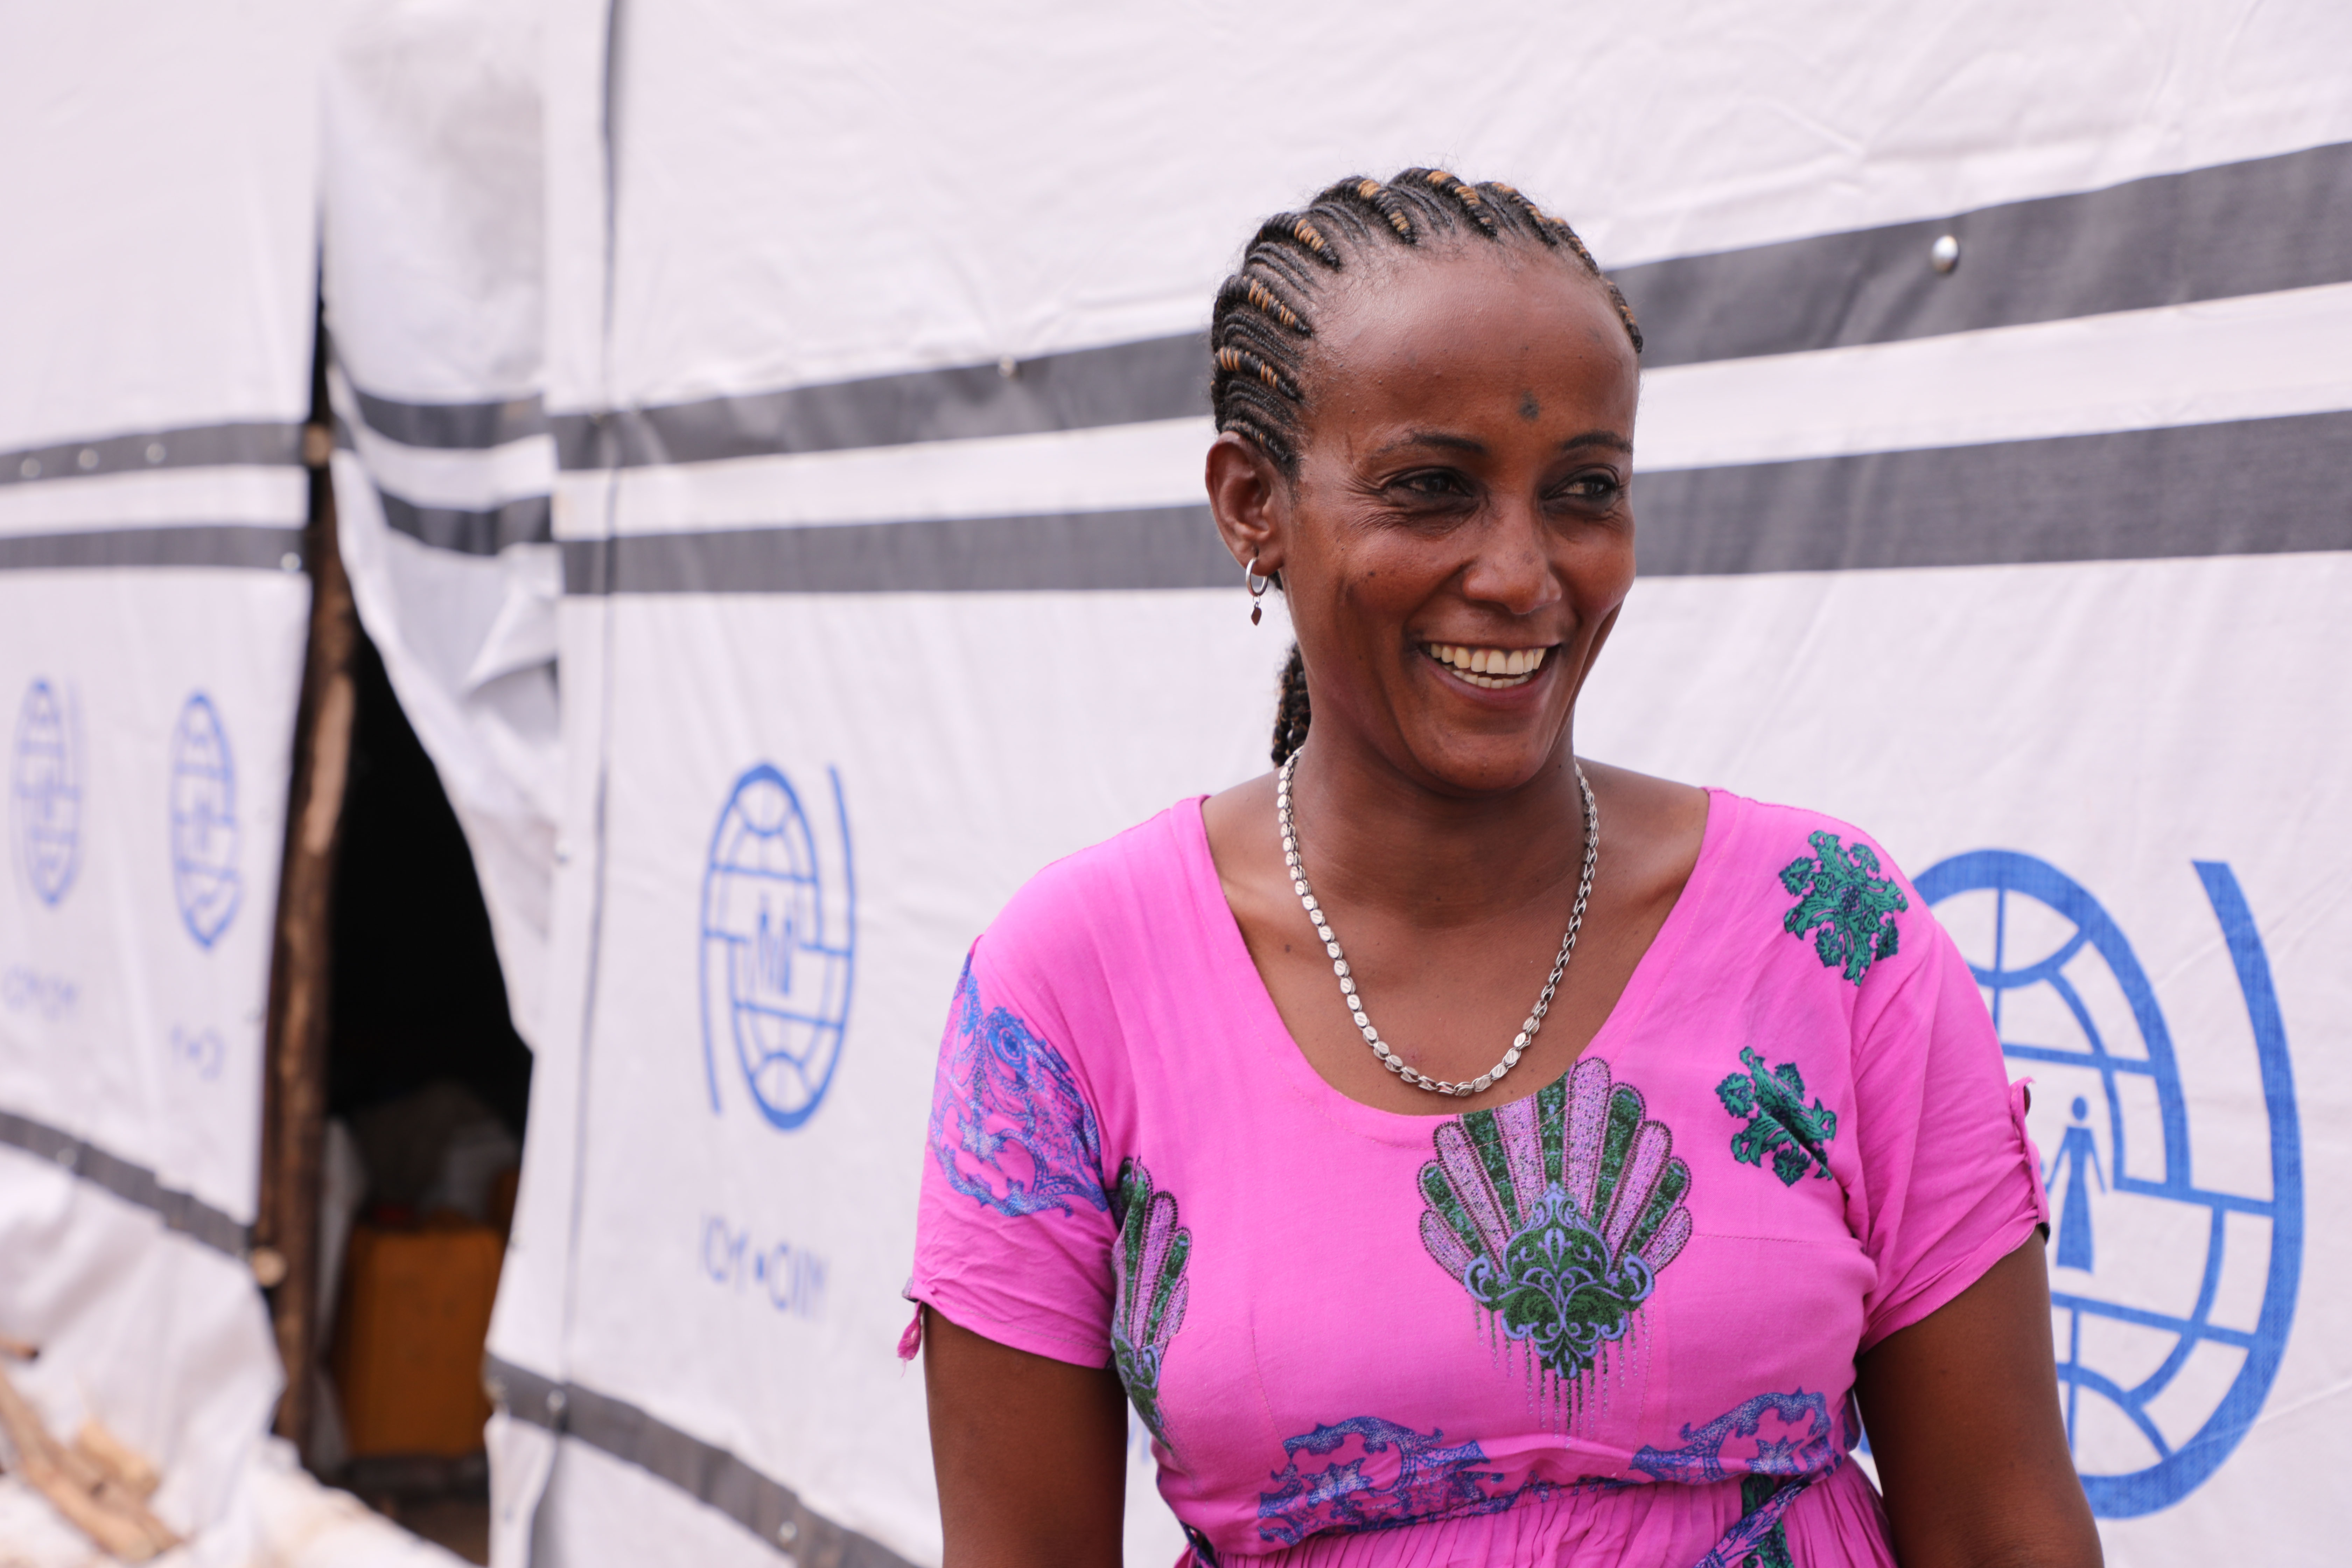 ShelterBox NZ providing essential aid to families in Ethiopia